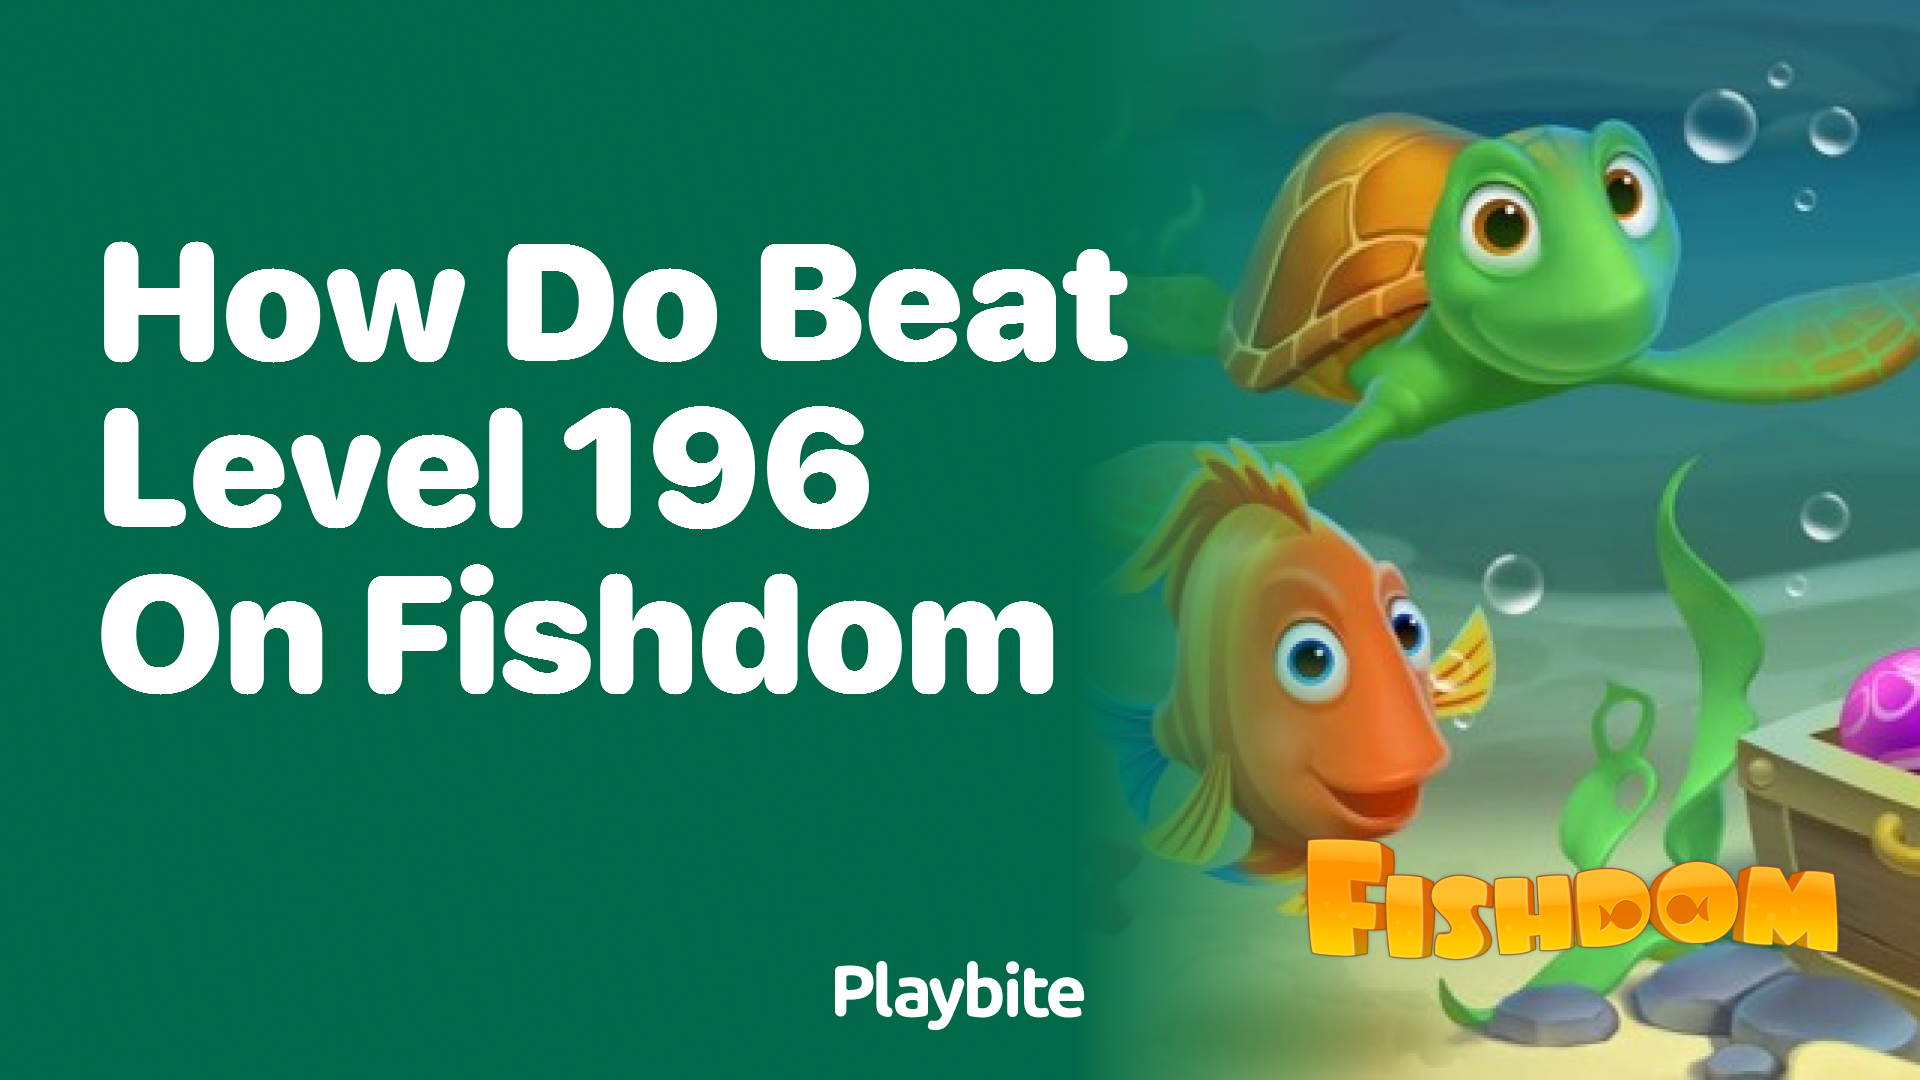 How to Beat Level 196 on Fishdom